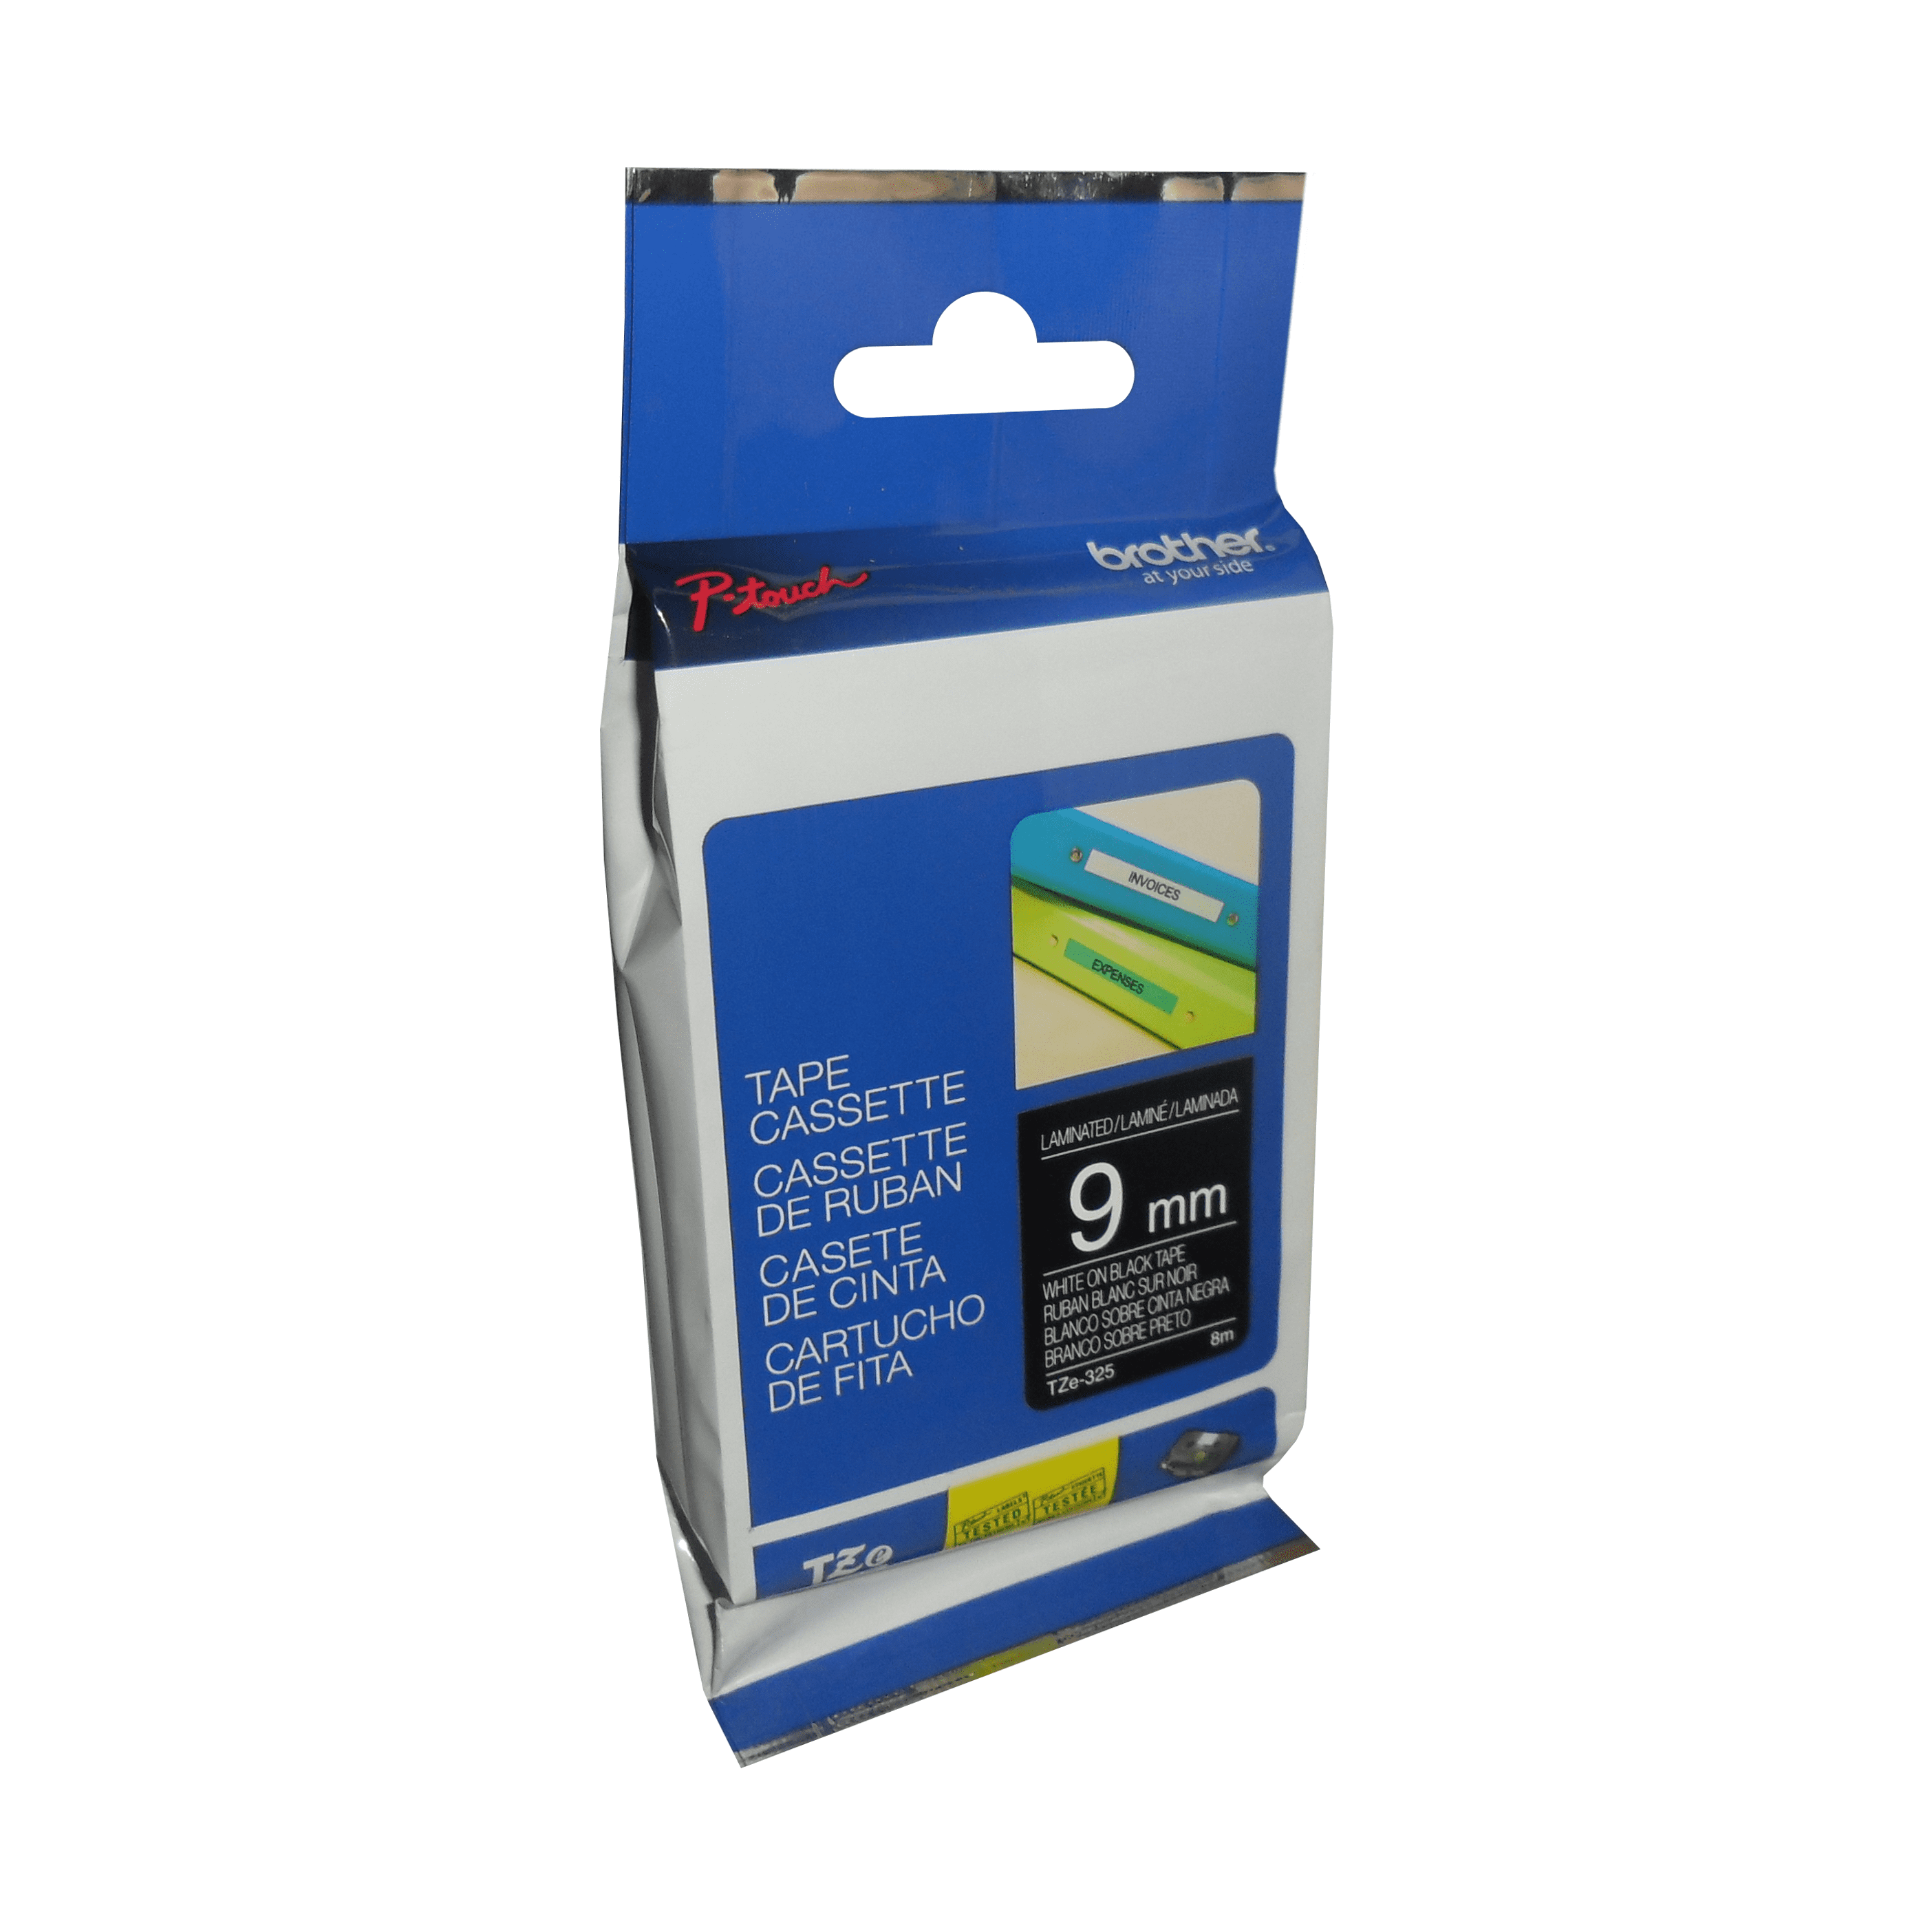 Brother Genuine TZe325 White on Black Laminated Tape for P-touch Label Makers, 9 mm wide x 8 m long